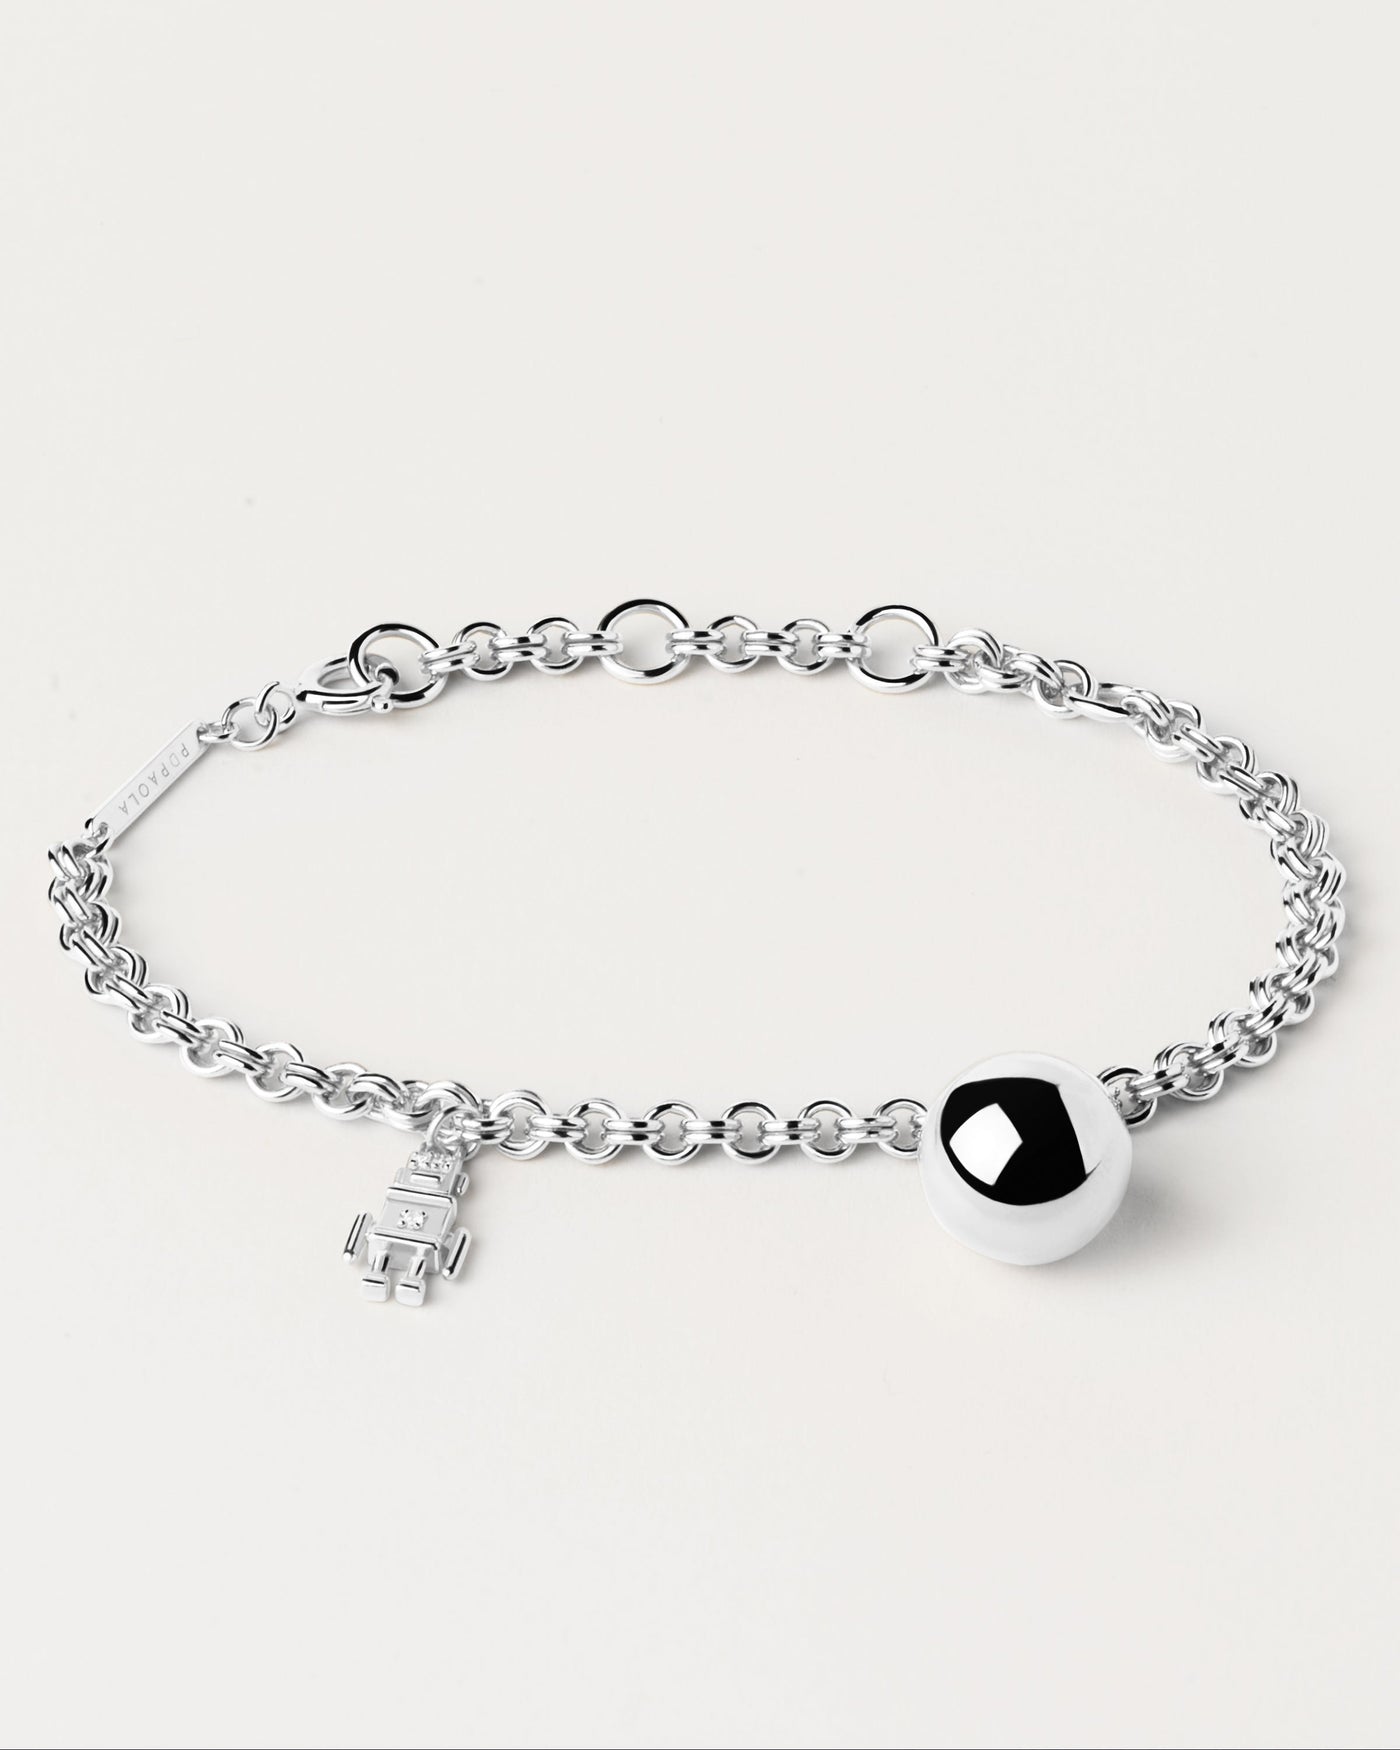 2023 Selection | Space Age Silver Bracelet. 925 silver chain bracelet with robot and ball motives. Get the latest arrival from PDPAOLA. Place your order safely and get this Best Seller. Free Shipping.